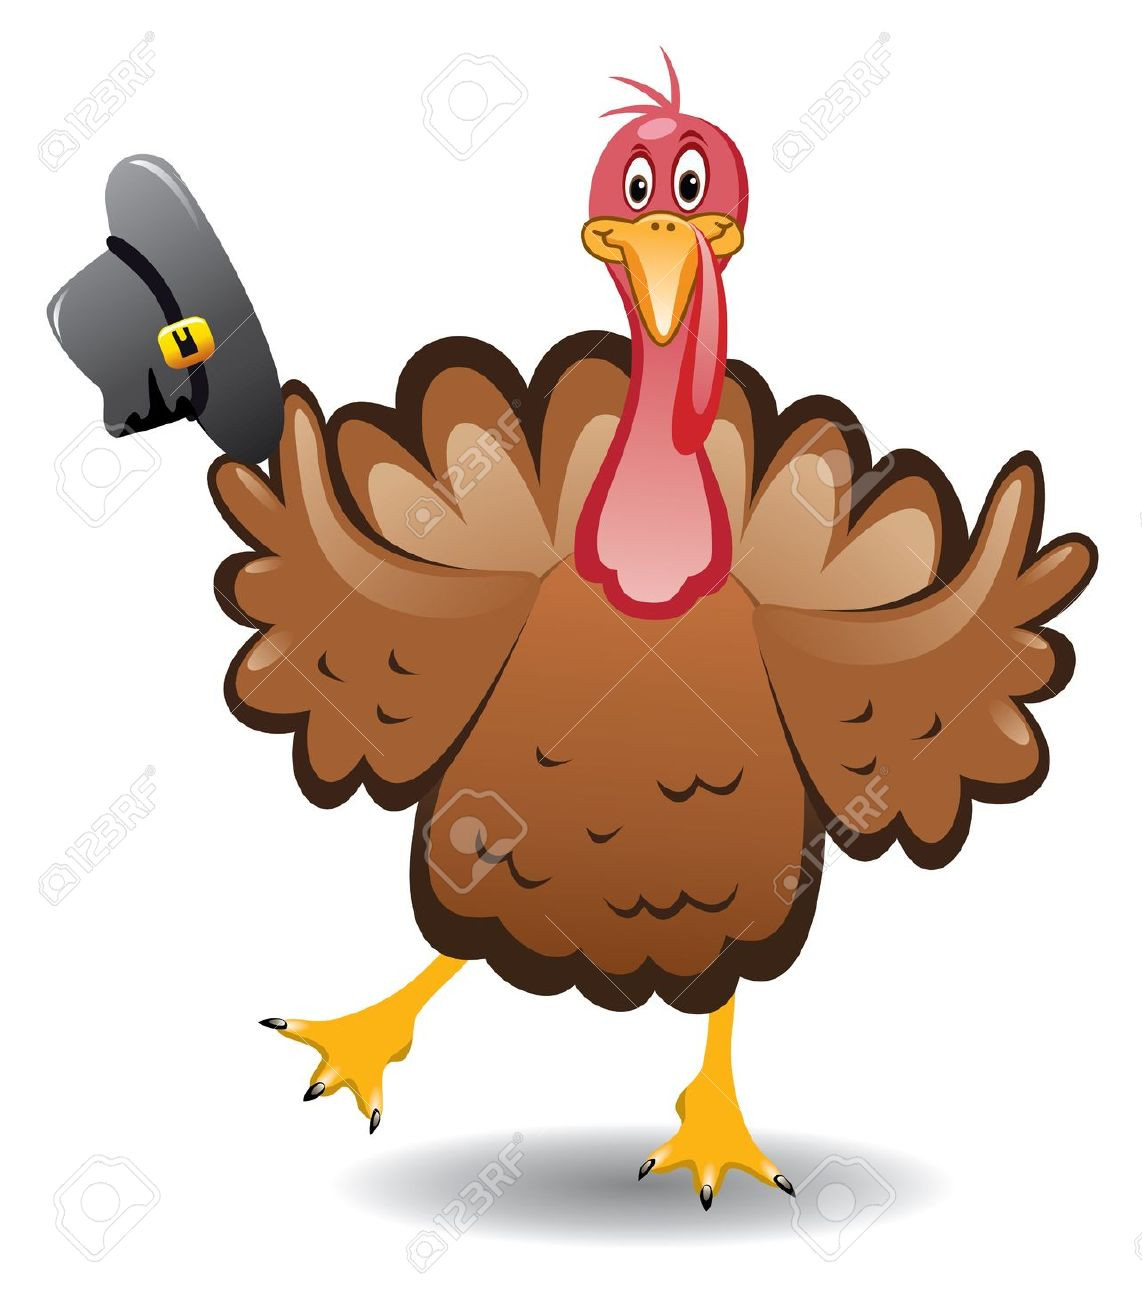 Images Of Thanksgiving Turkey
 Pavo clipart Clipground